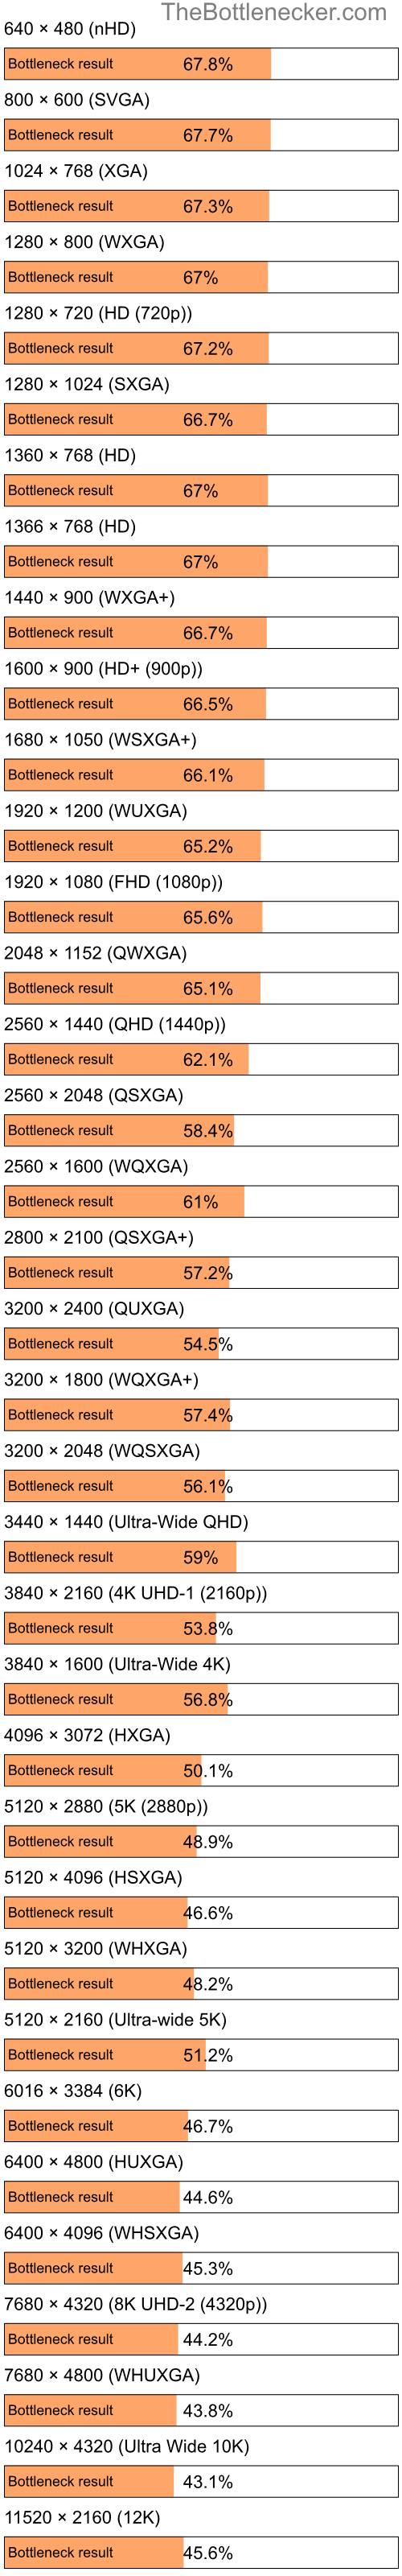 Bottleneck results by resolution for AMD A4-6300B and NVIDIA GeForce RTX 3050 in General Tasks